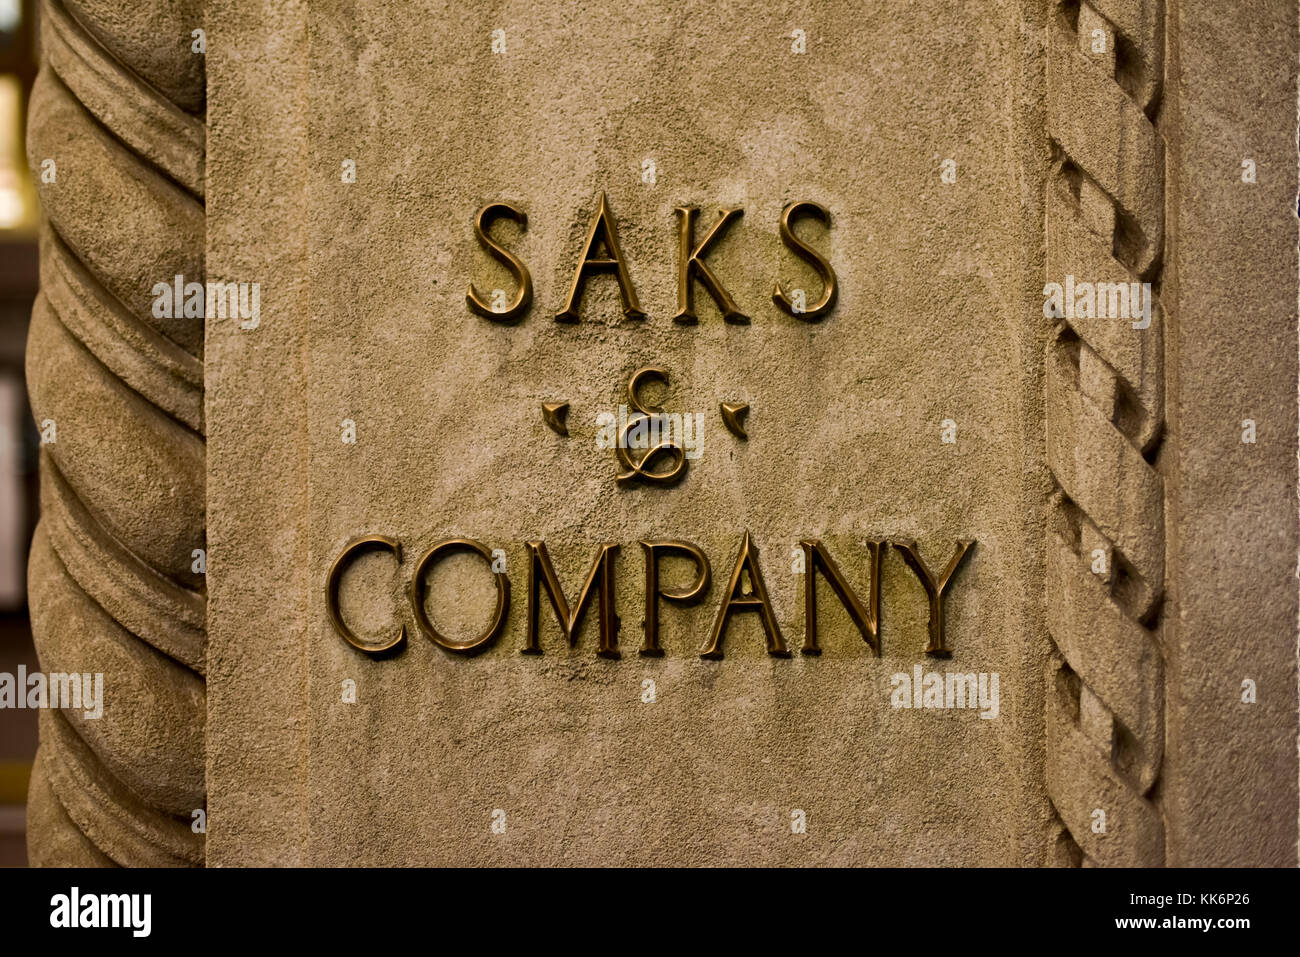 New York, New York - October 29, 2016: Saks and Company signage on the flagship Fifth Avenue store of high end department store Saks Fifth Avenue. The Stock Photo